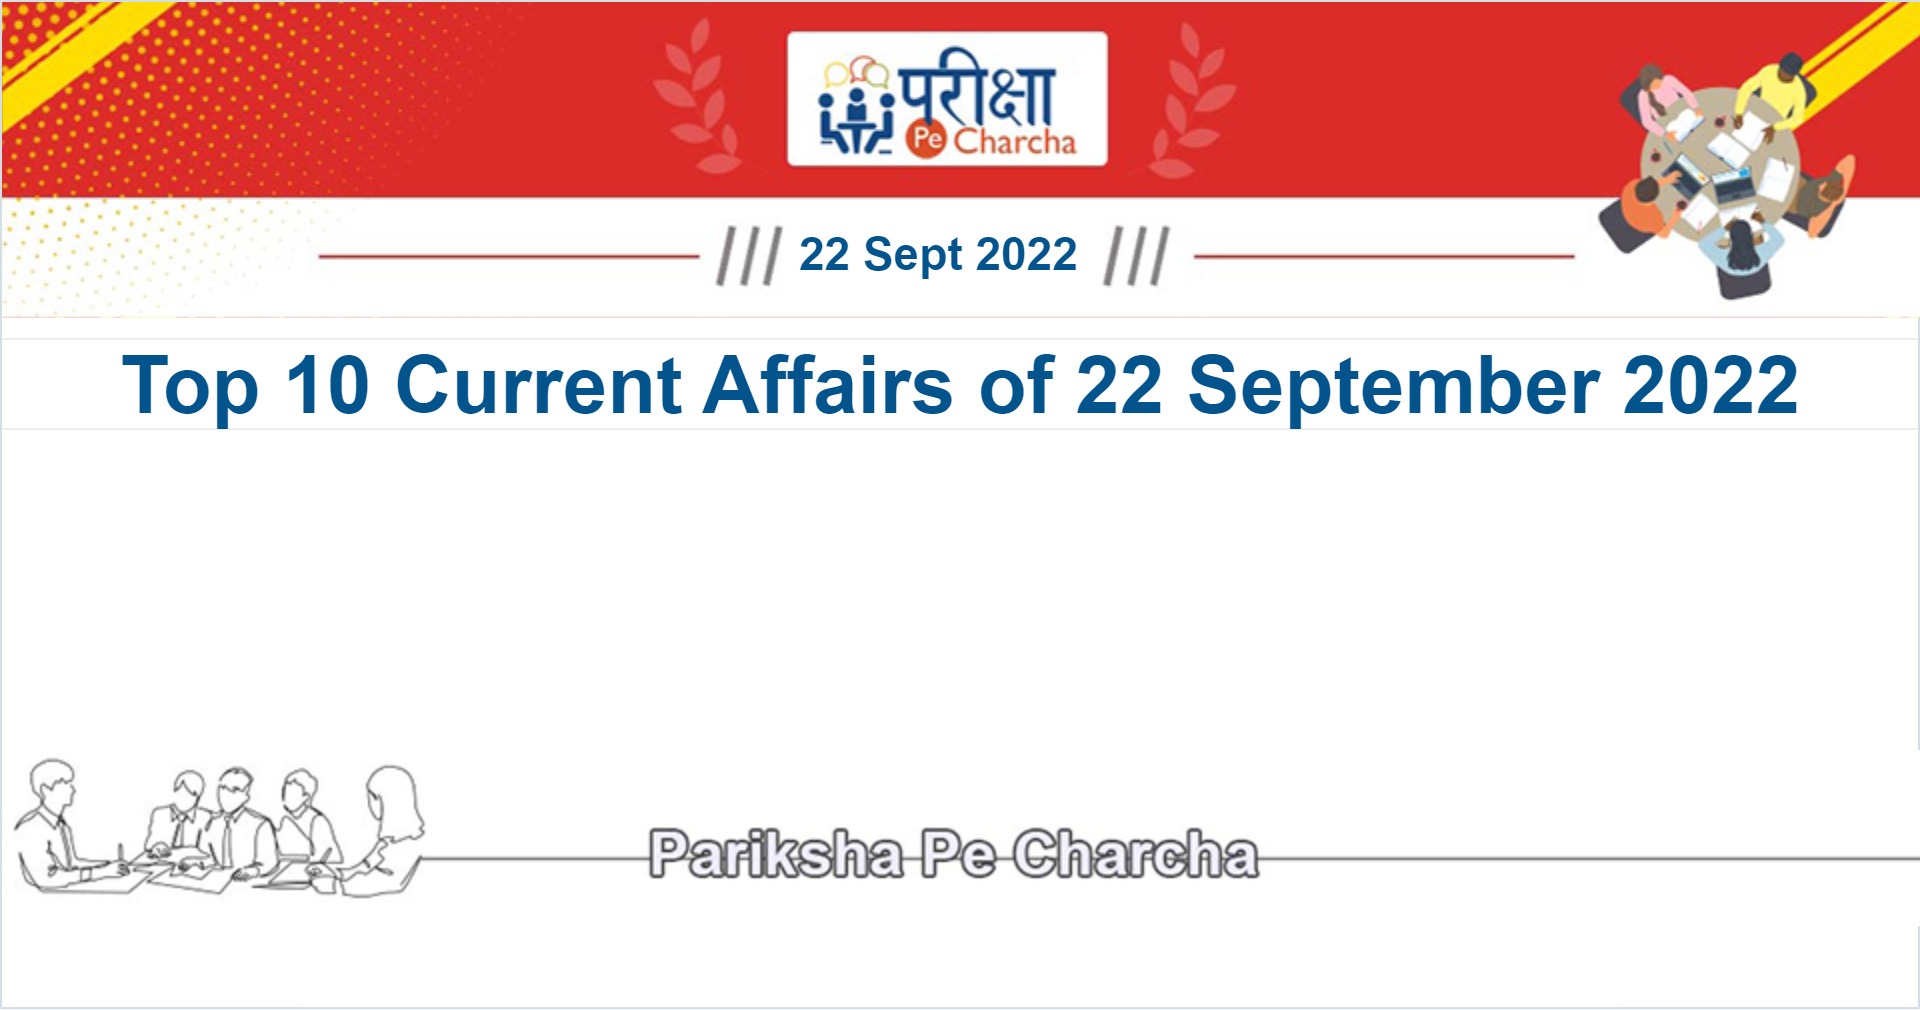 Current Affairs of 22 September 2022 in English and Hindi